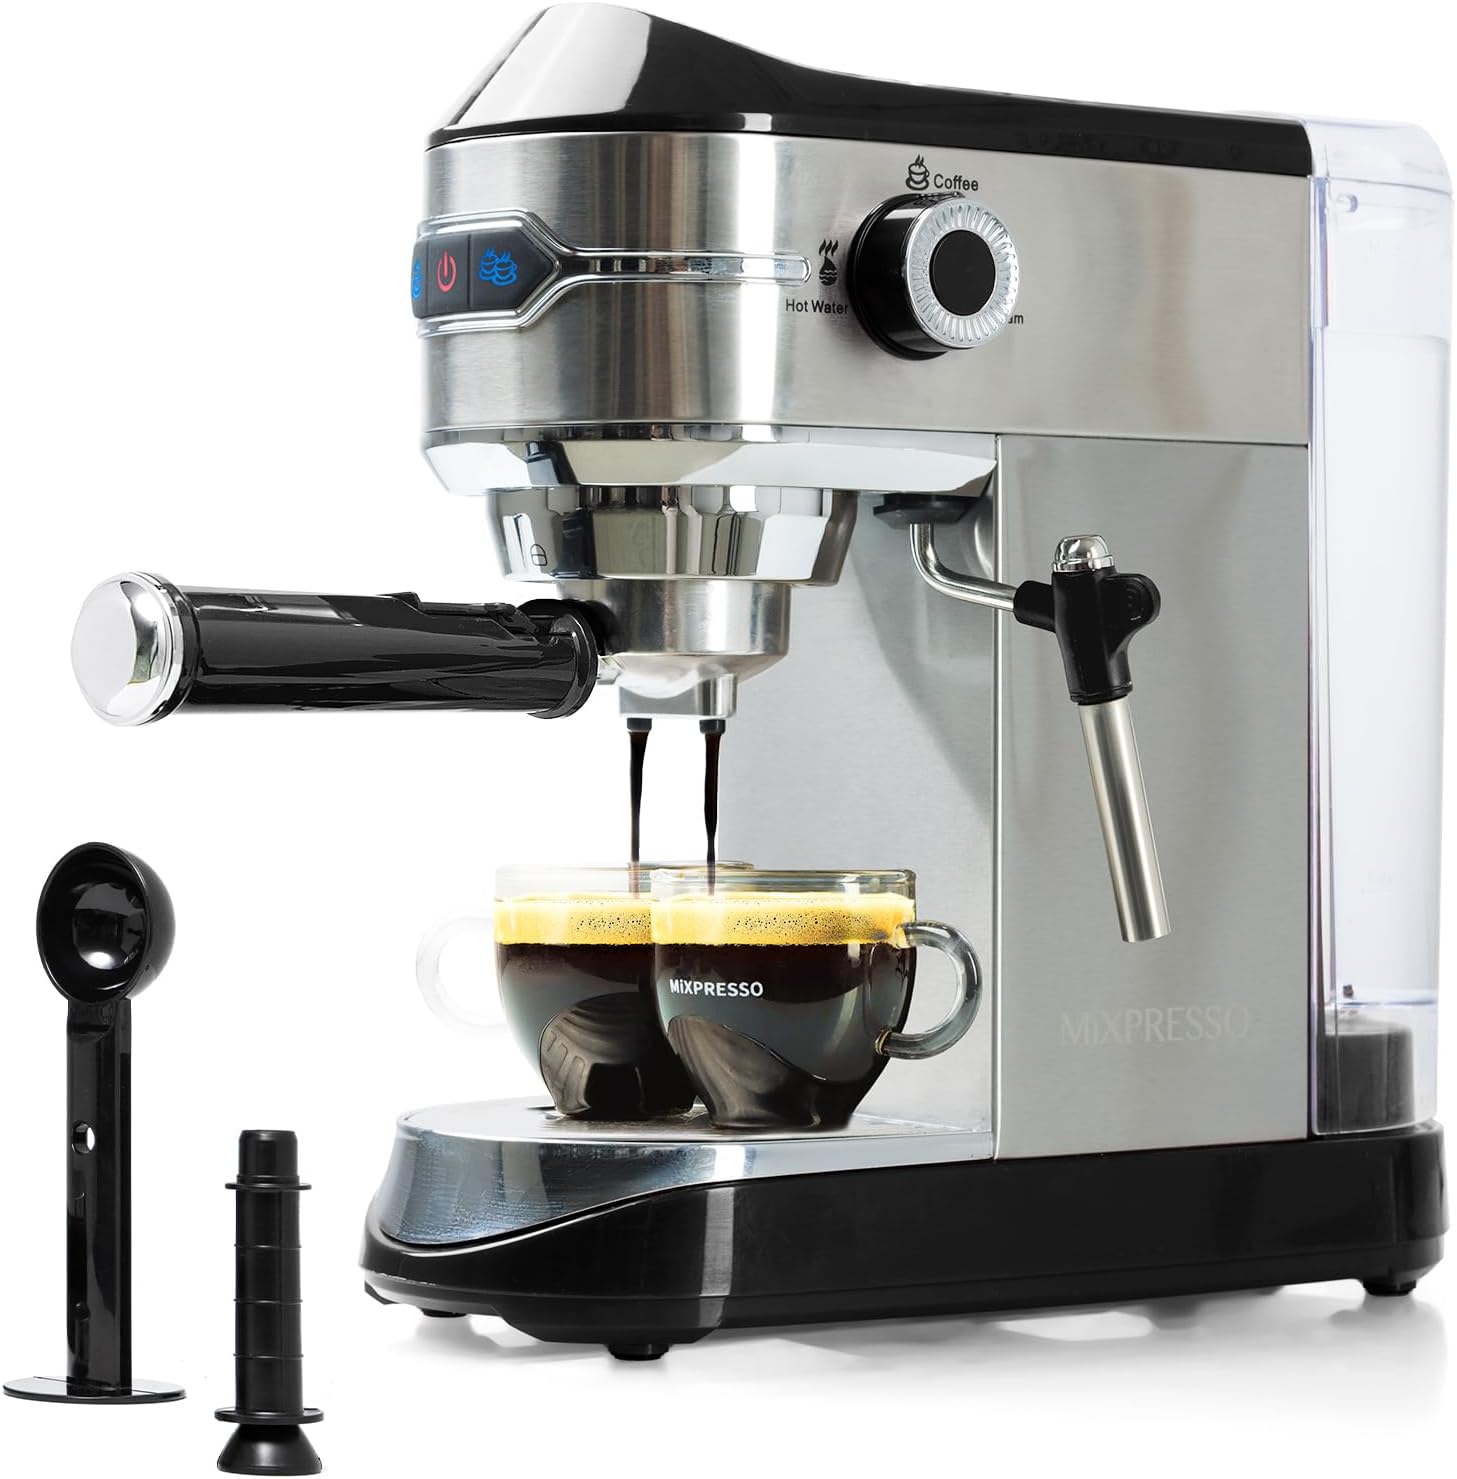 I've now had this espresso maker for eight months. I often use it every day; on average, certainly four-to-five times a week. I myself couldn't justify spending several hundred -- or many hundred -- dollars on an espresso machine, so I looked at 